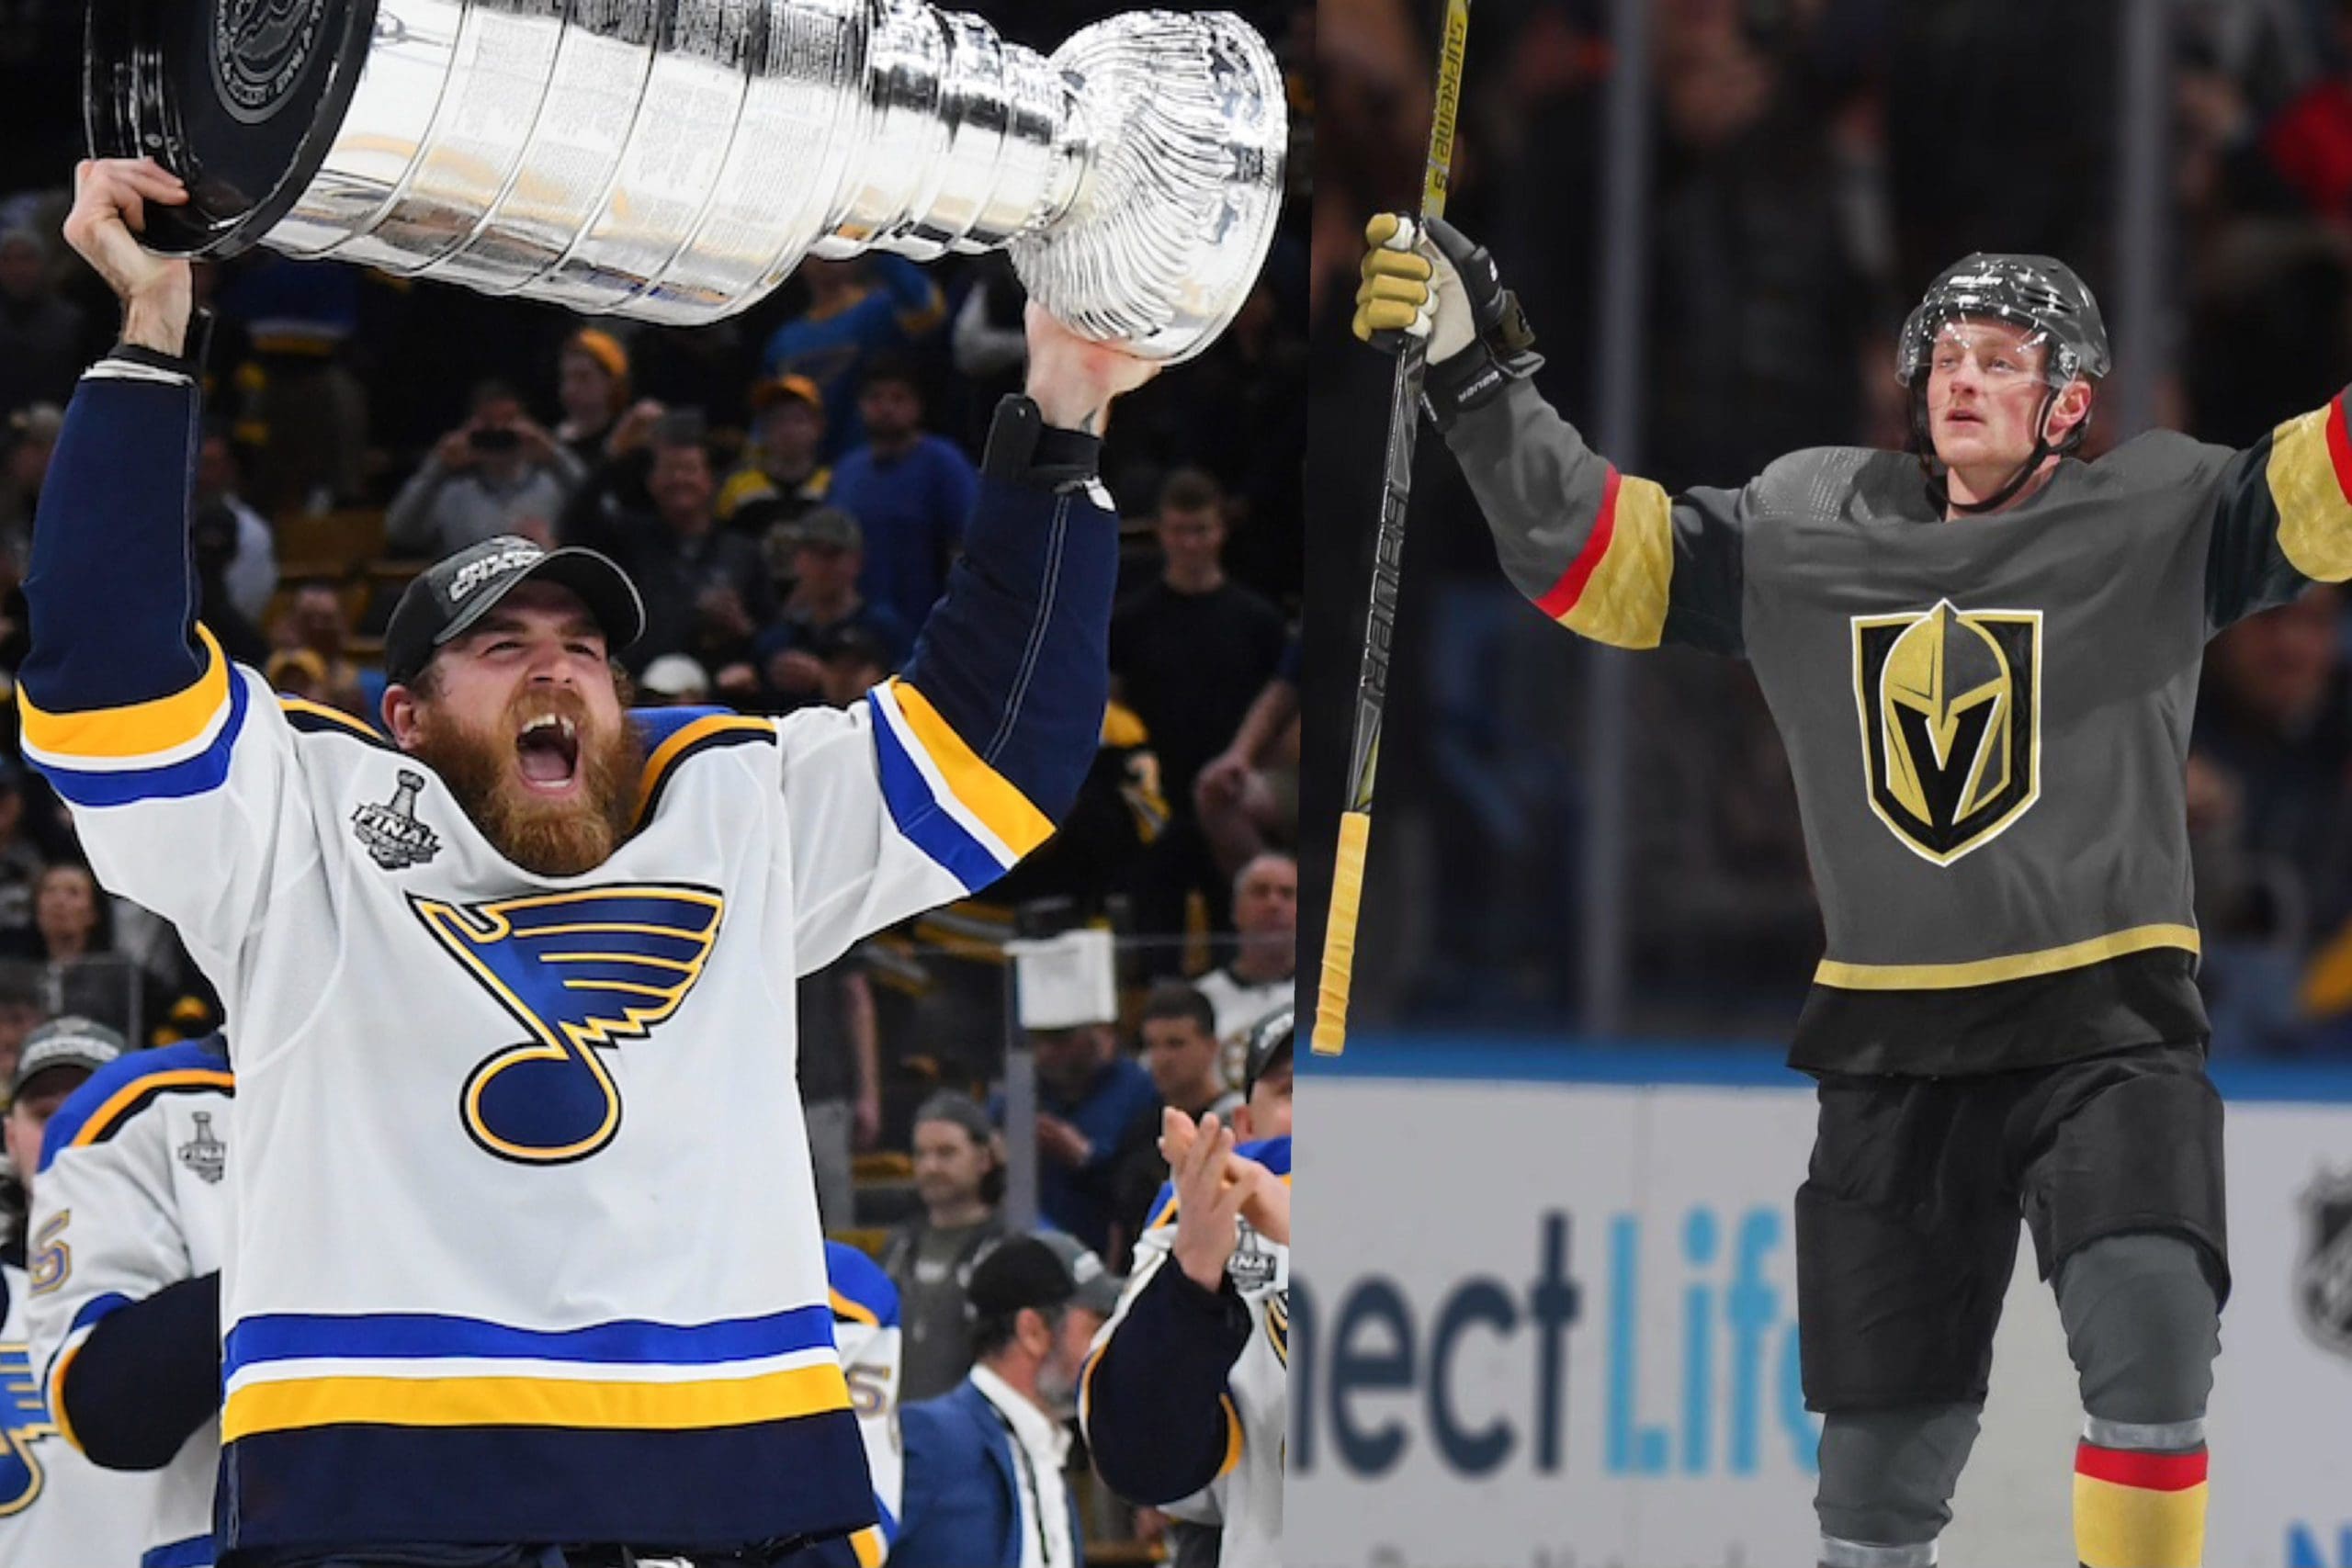 Ryan O'Reilly Traded to Blues; Sabres Receive 3 Players, 2 Picks